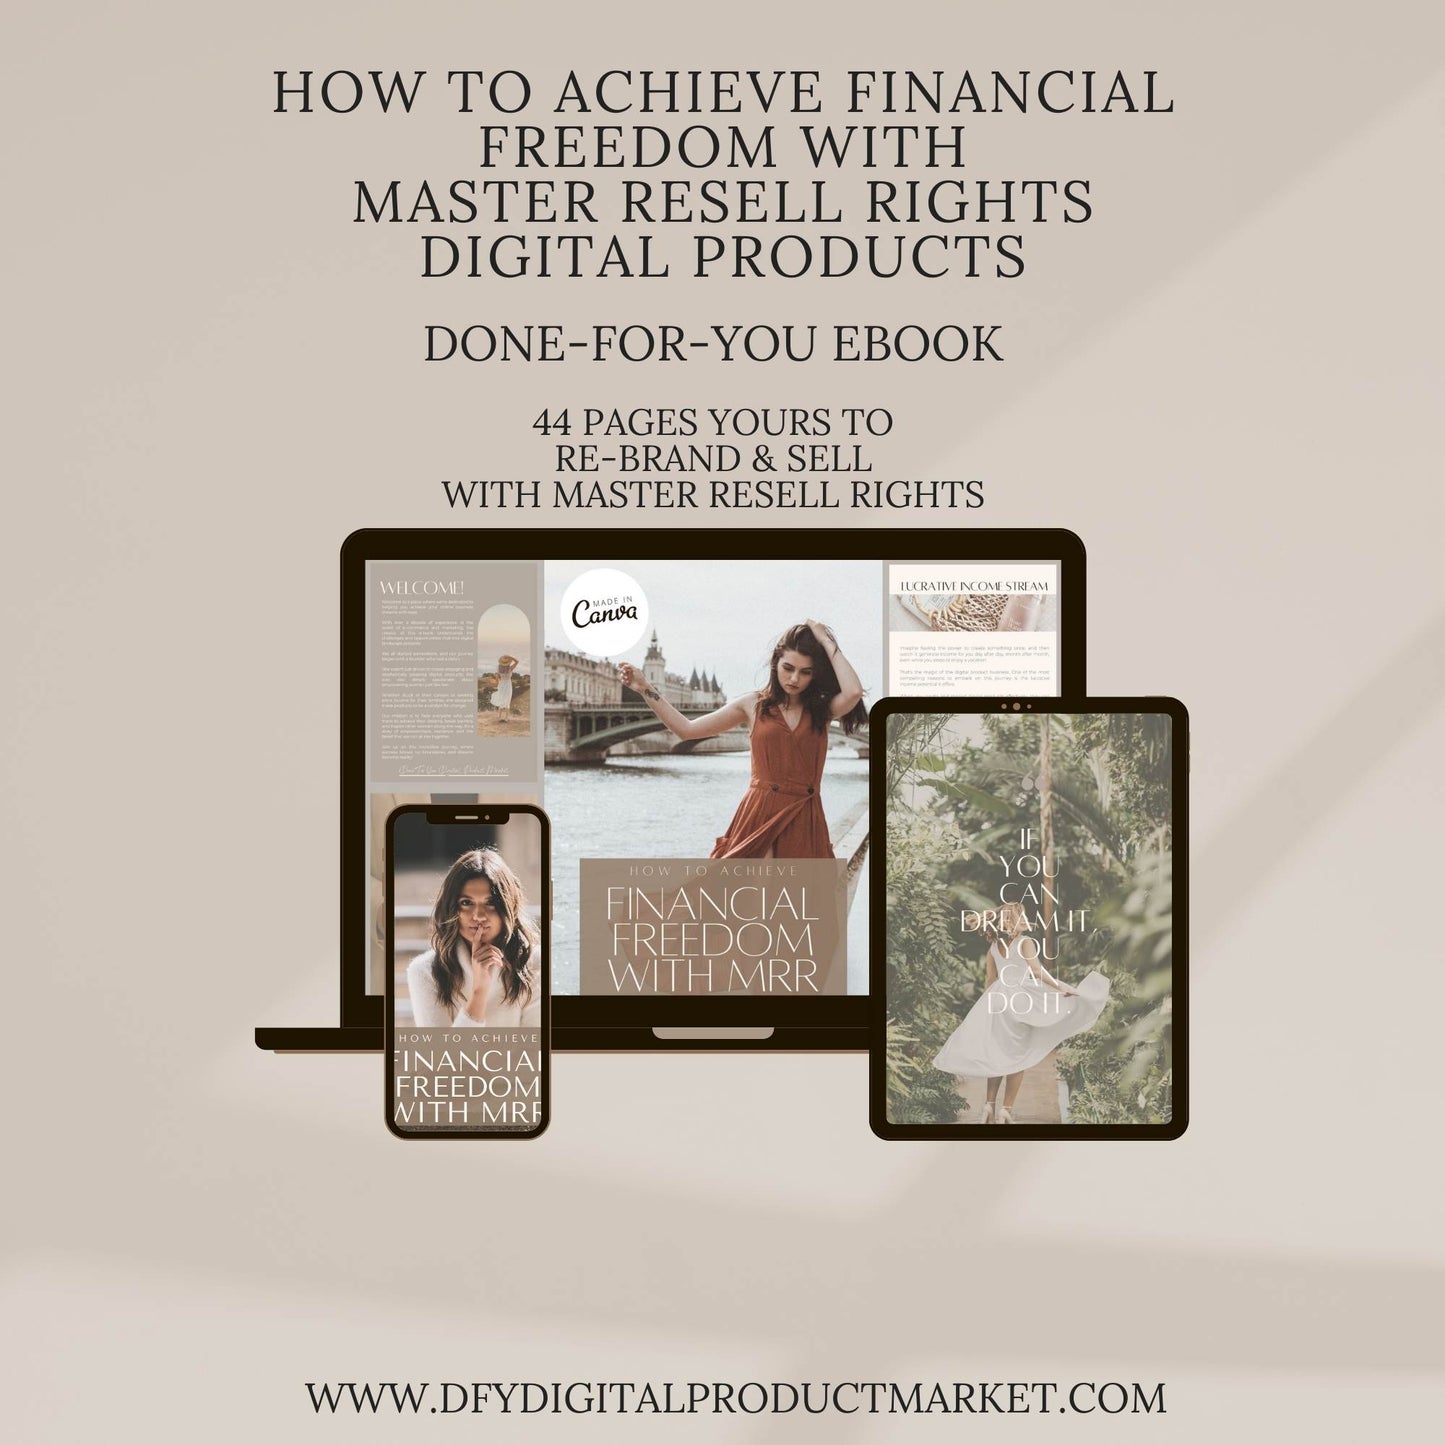 Achieve Financial Freedom with Master Resell Rights eBook